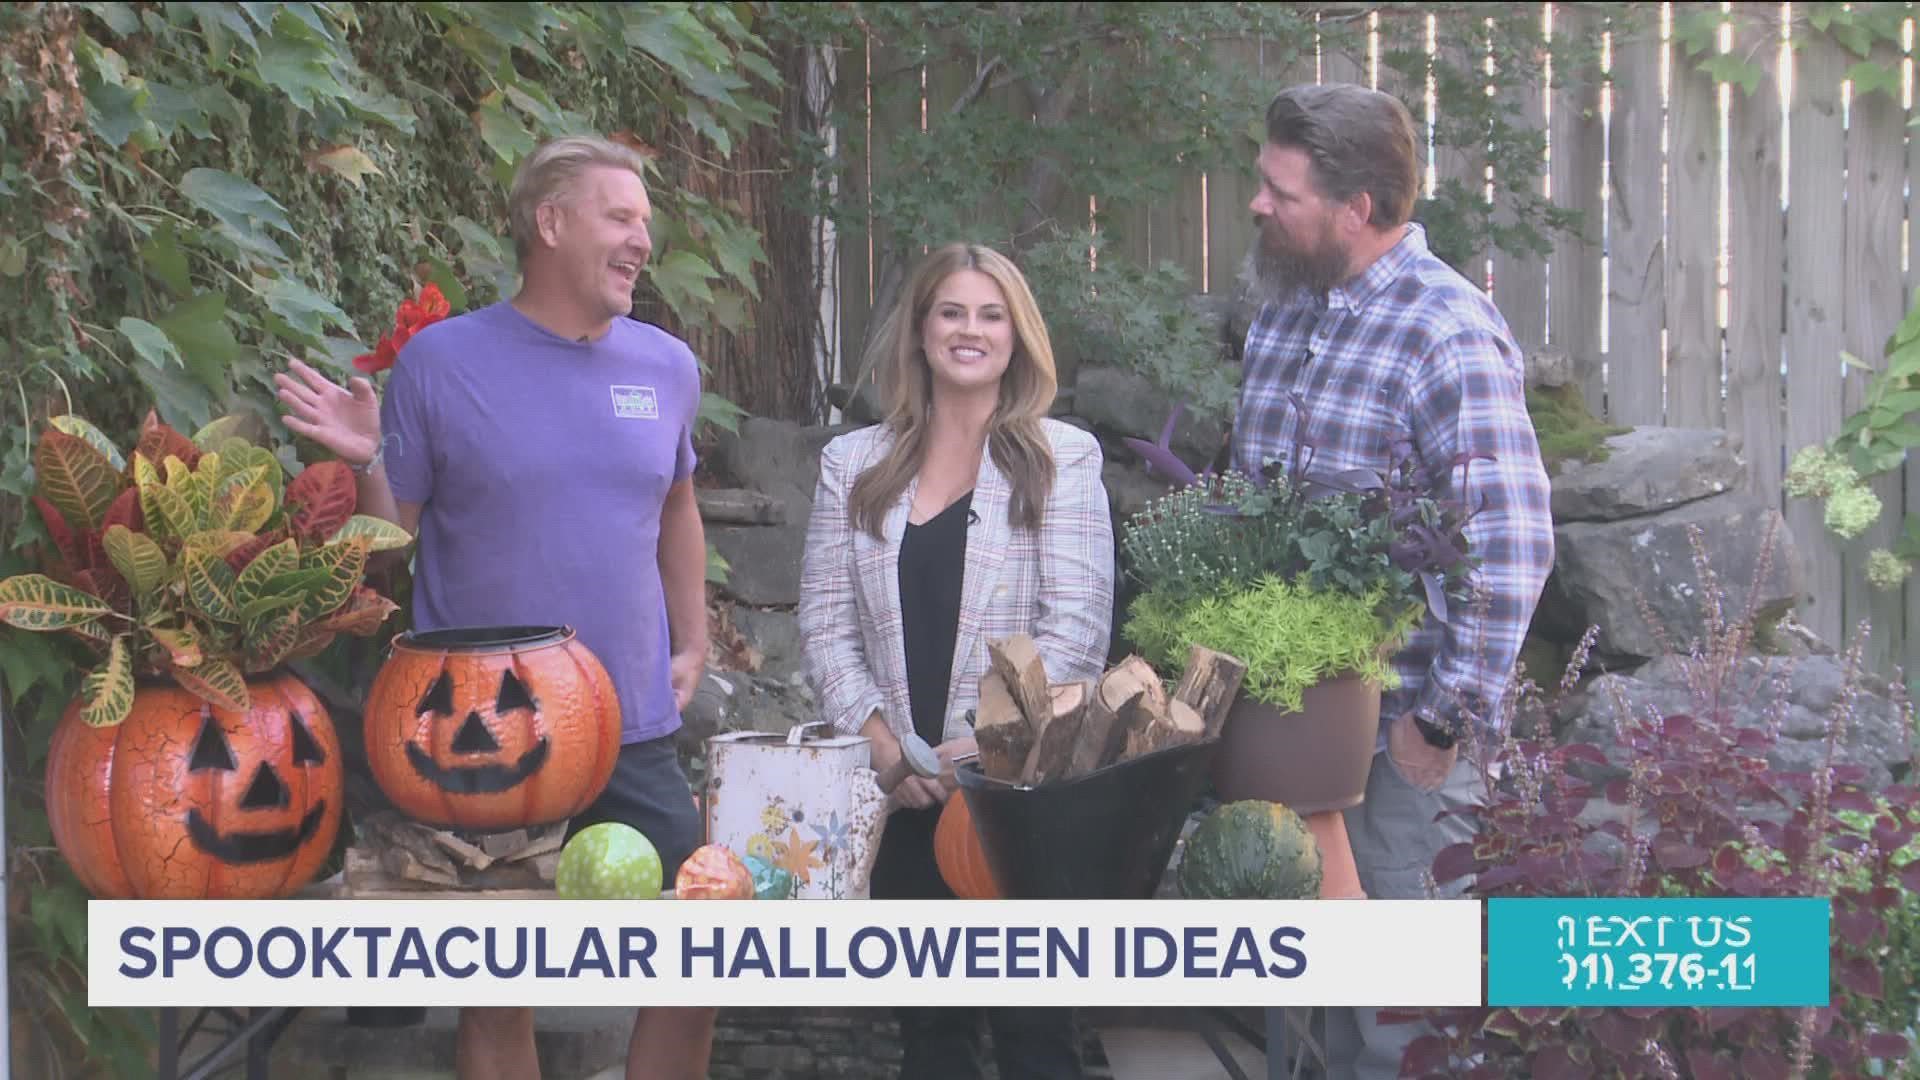 Make your neighbors envious with spooky but stylish autumn ideas to make your front porch look festive for this Halloween and Fall season.